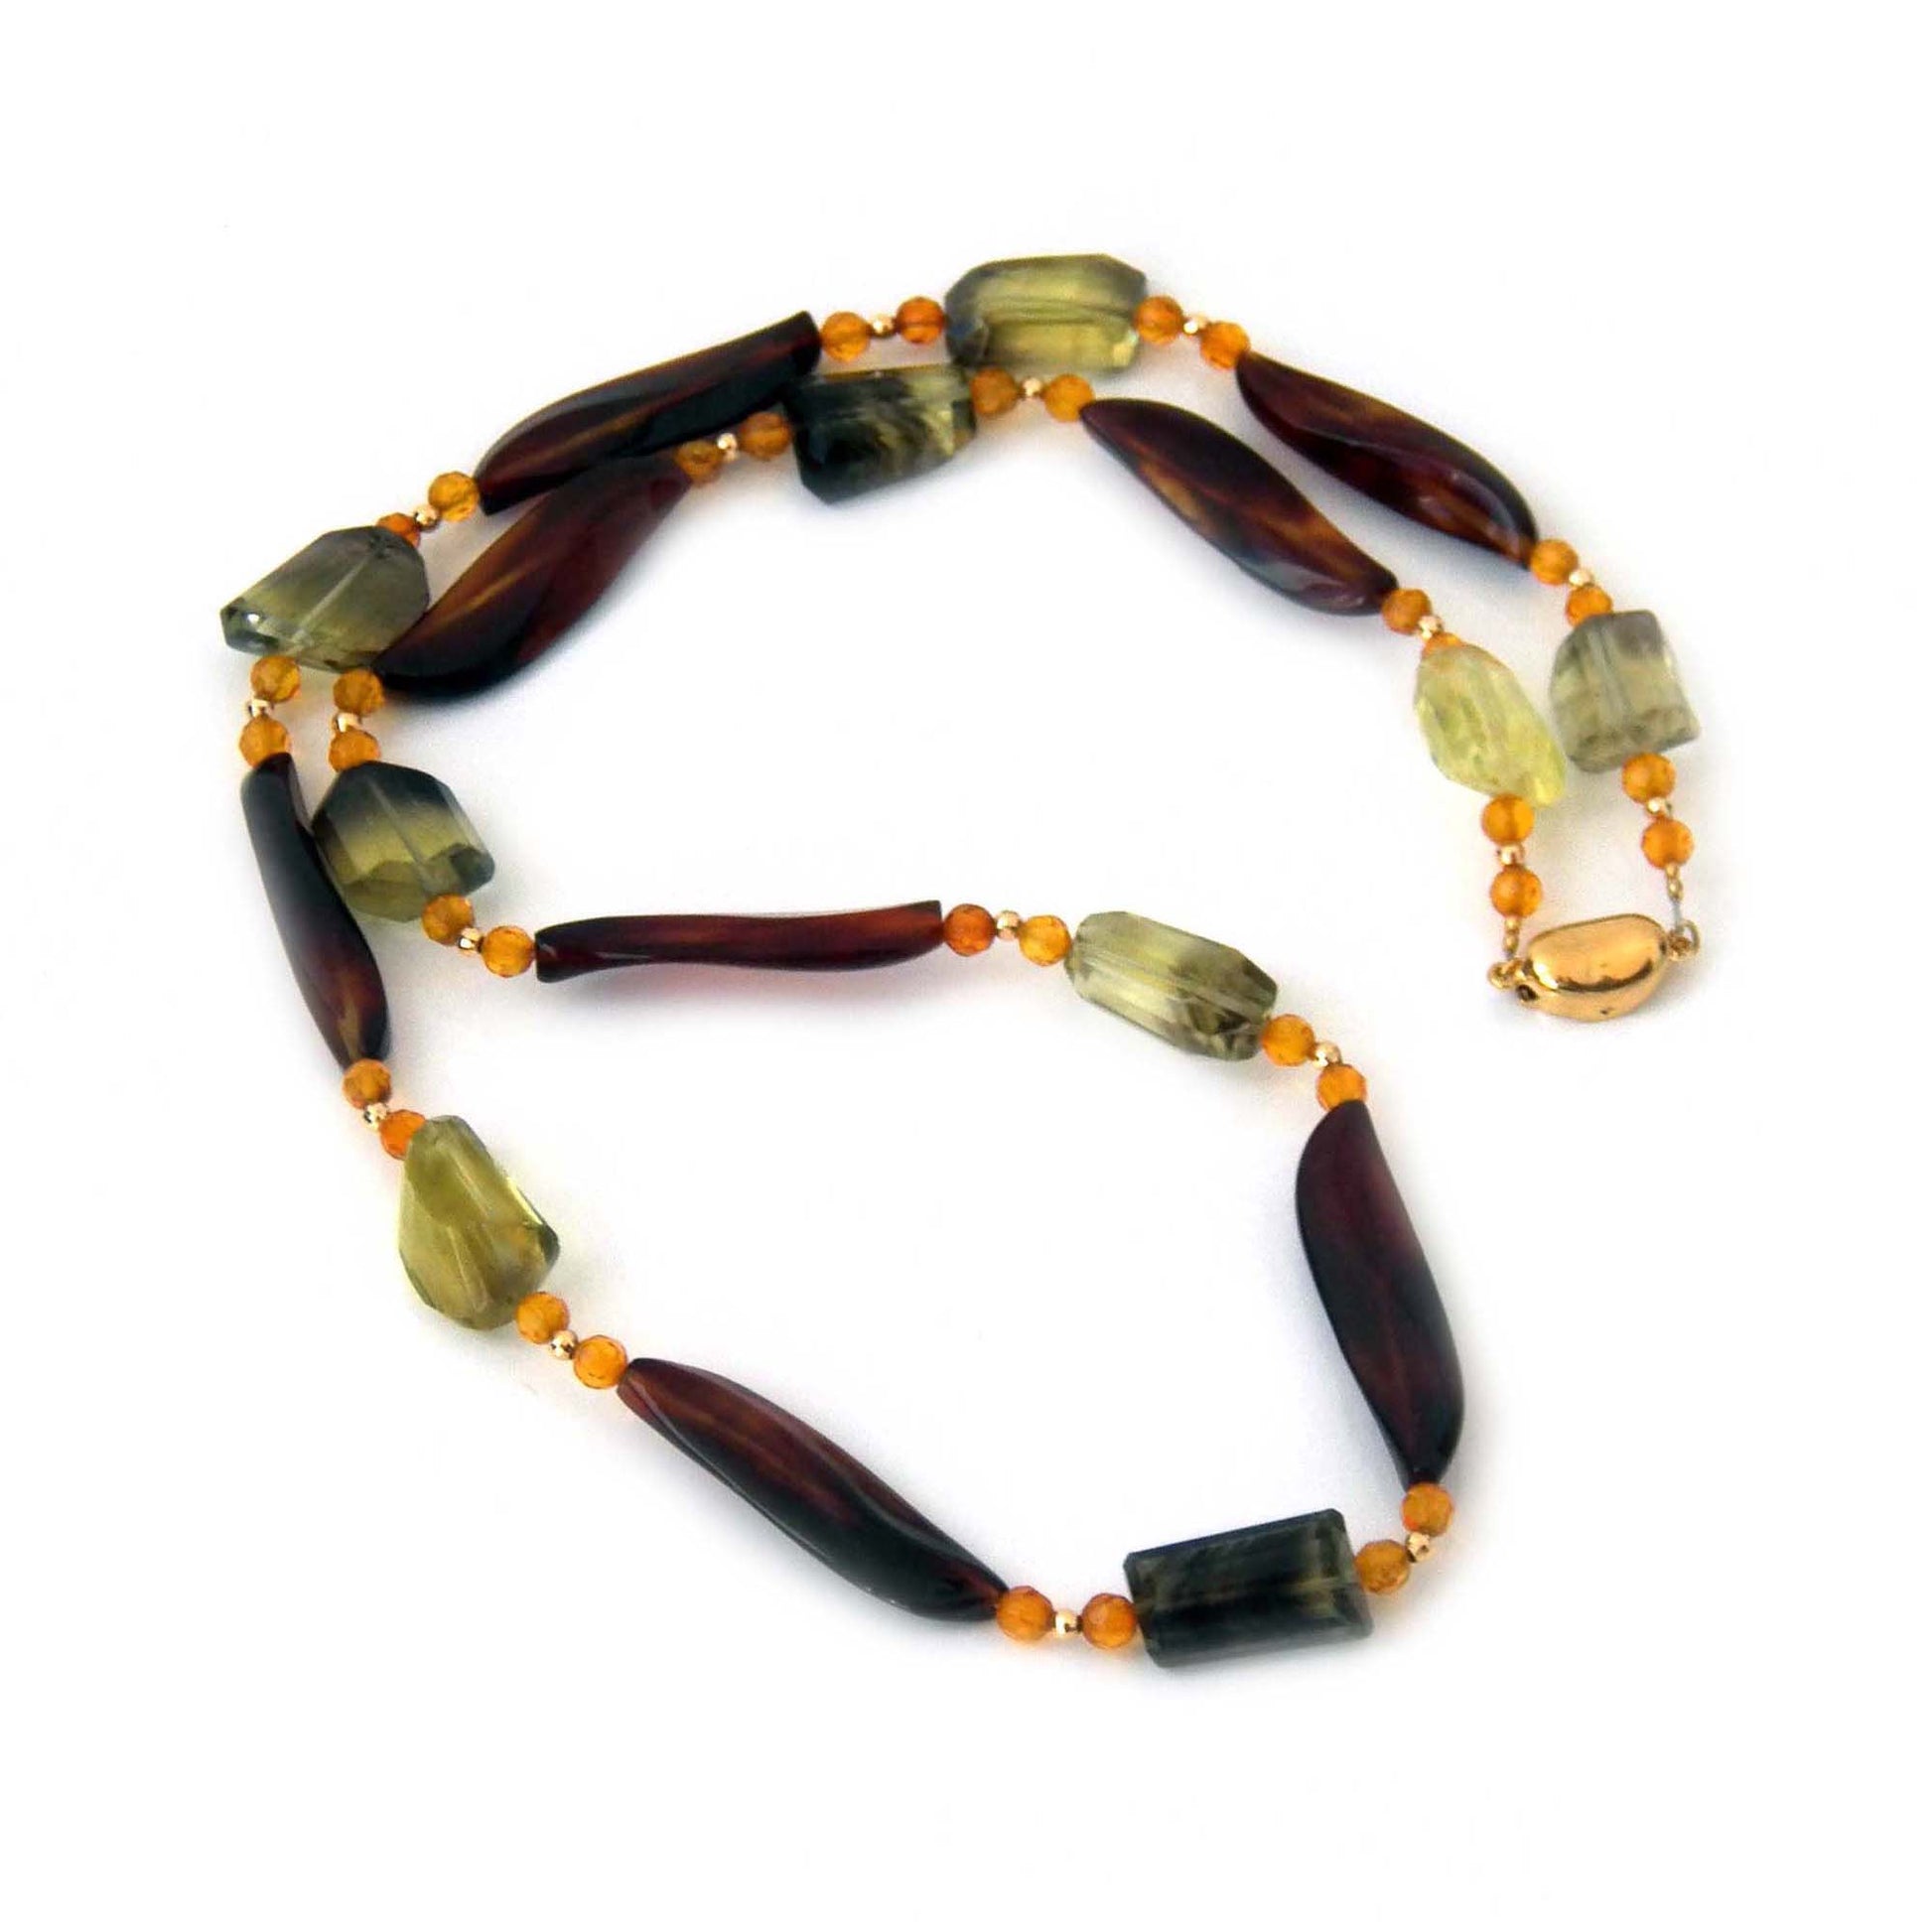 Green Amethyst, Tortoise Shell, Faceted Amber Necklace